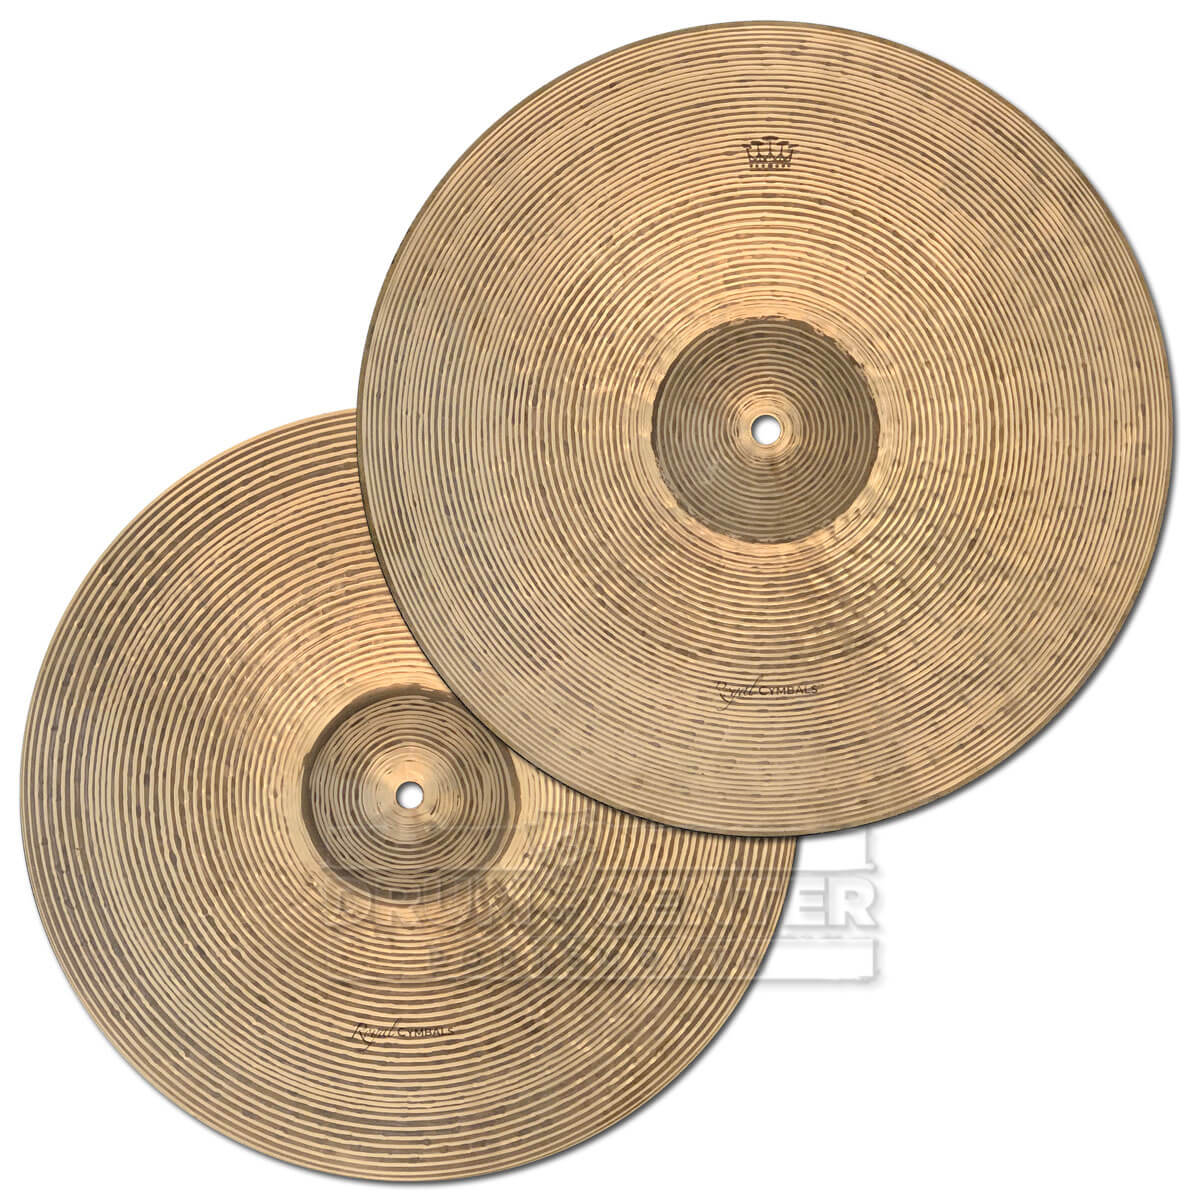 Royal Cymbals Royal Dry Hi Hat Cymbals 14" 1045/1374 grams - Drum Center Of Portsmouth